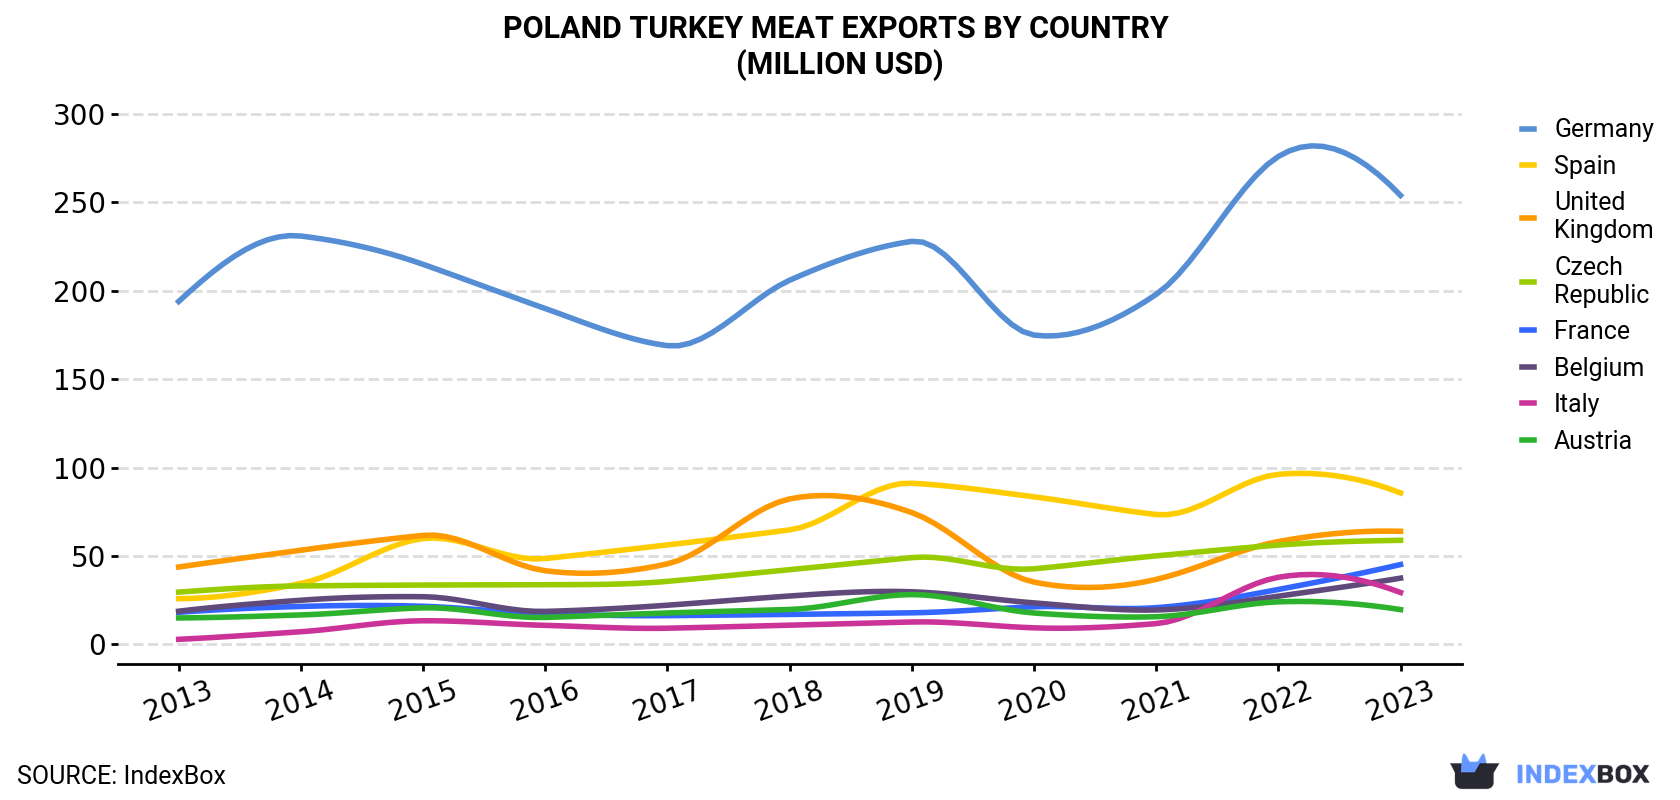 Poland Turkey Meat Exports By Country (Million USD)